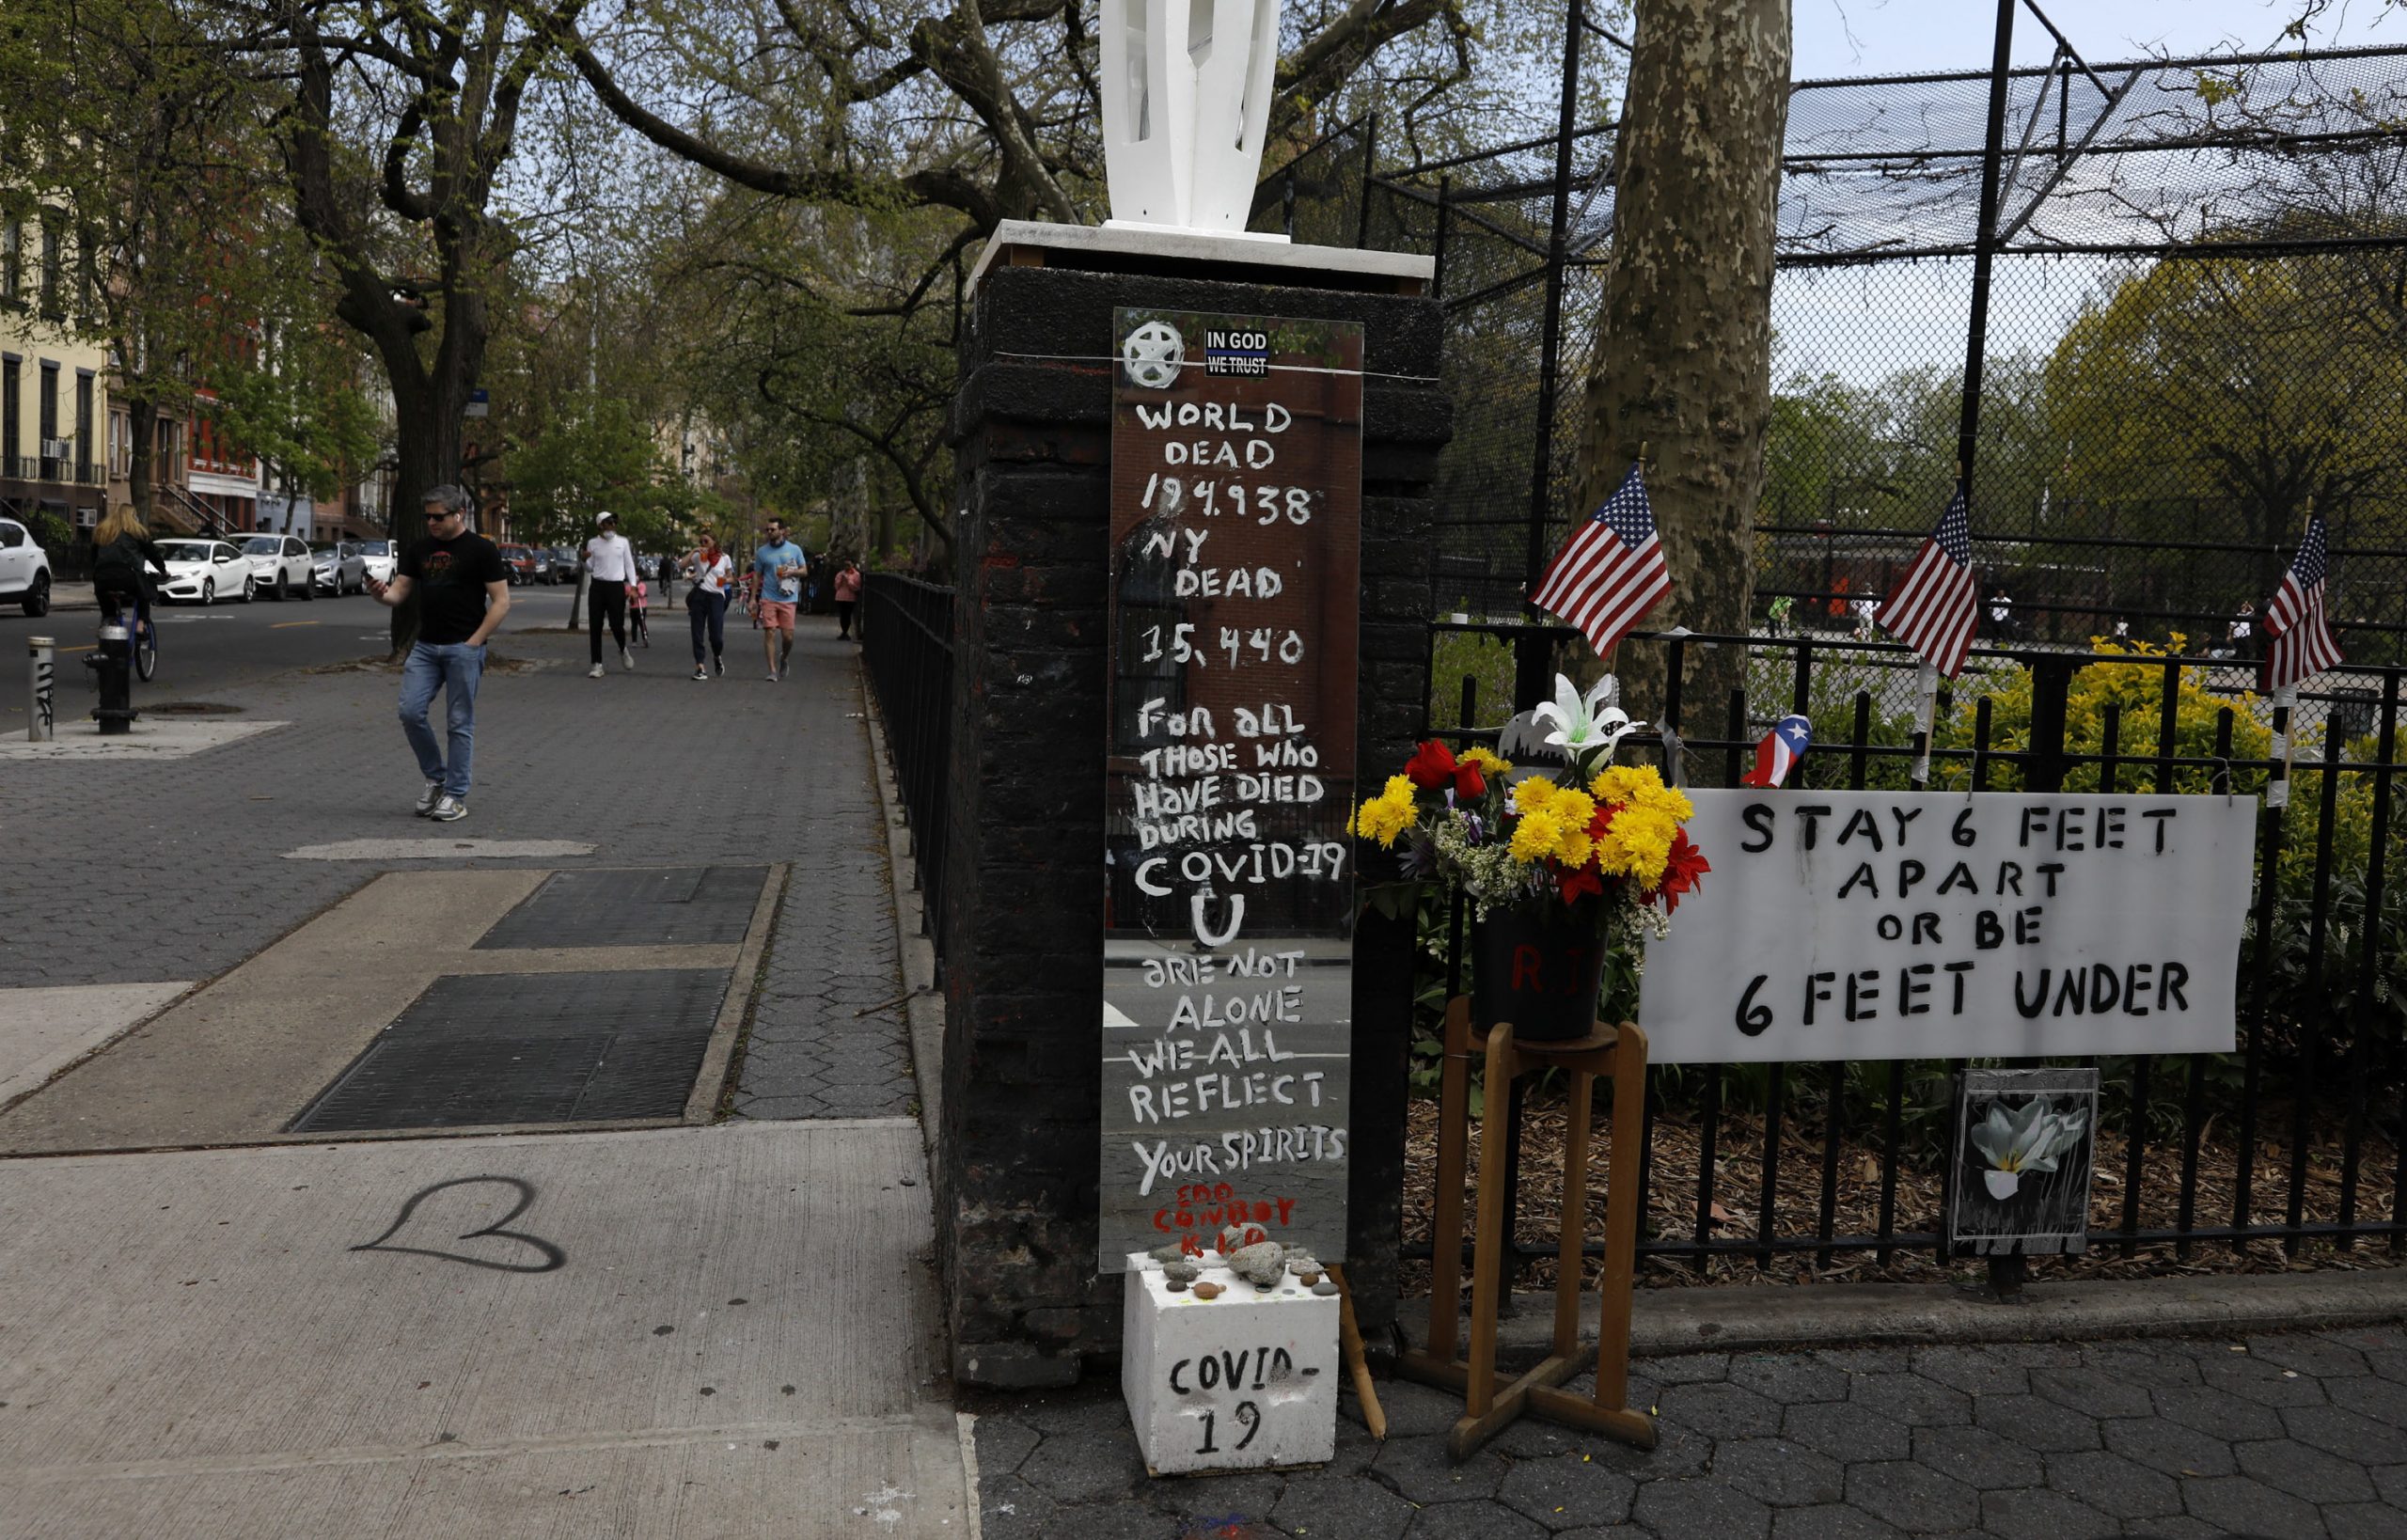 epa08384618 People without masks walk past a memorial outside of Tompkins Square Park in Alphabet City neighborhood of New York, New York, USA, 25 April 2020. Restrictions requiring the shut down of all non-essential businesses are currently in place around the United States to stop the spread of the highly-contagious coronavirus. These restrictions are having massive economic implications and some local and federal politicians are beginning to suggest plans for lifting some rules in an effort to get parts of the economy going again; many health officials are worried this will lead to another spike in COVID-19 cases.  EPA/JASON SZENES